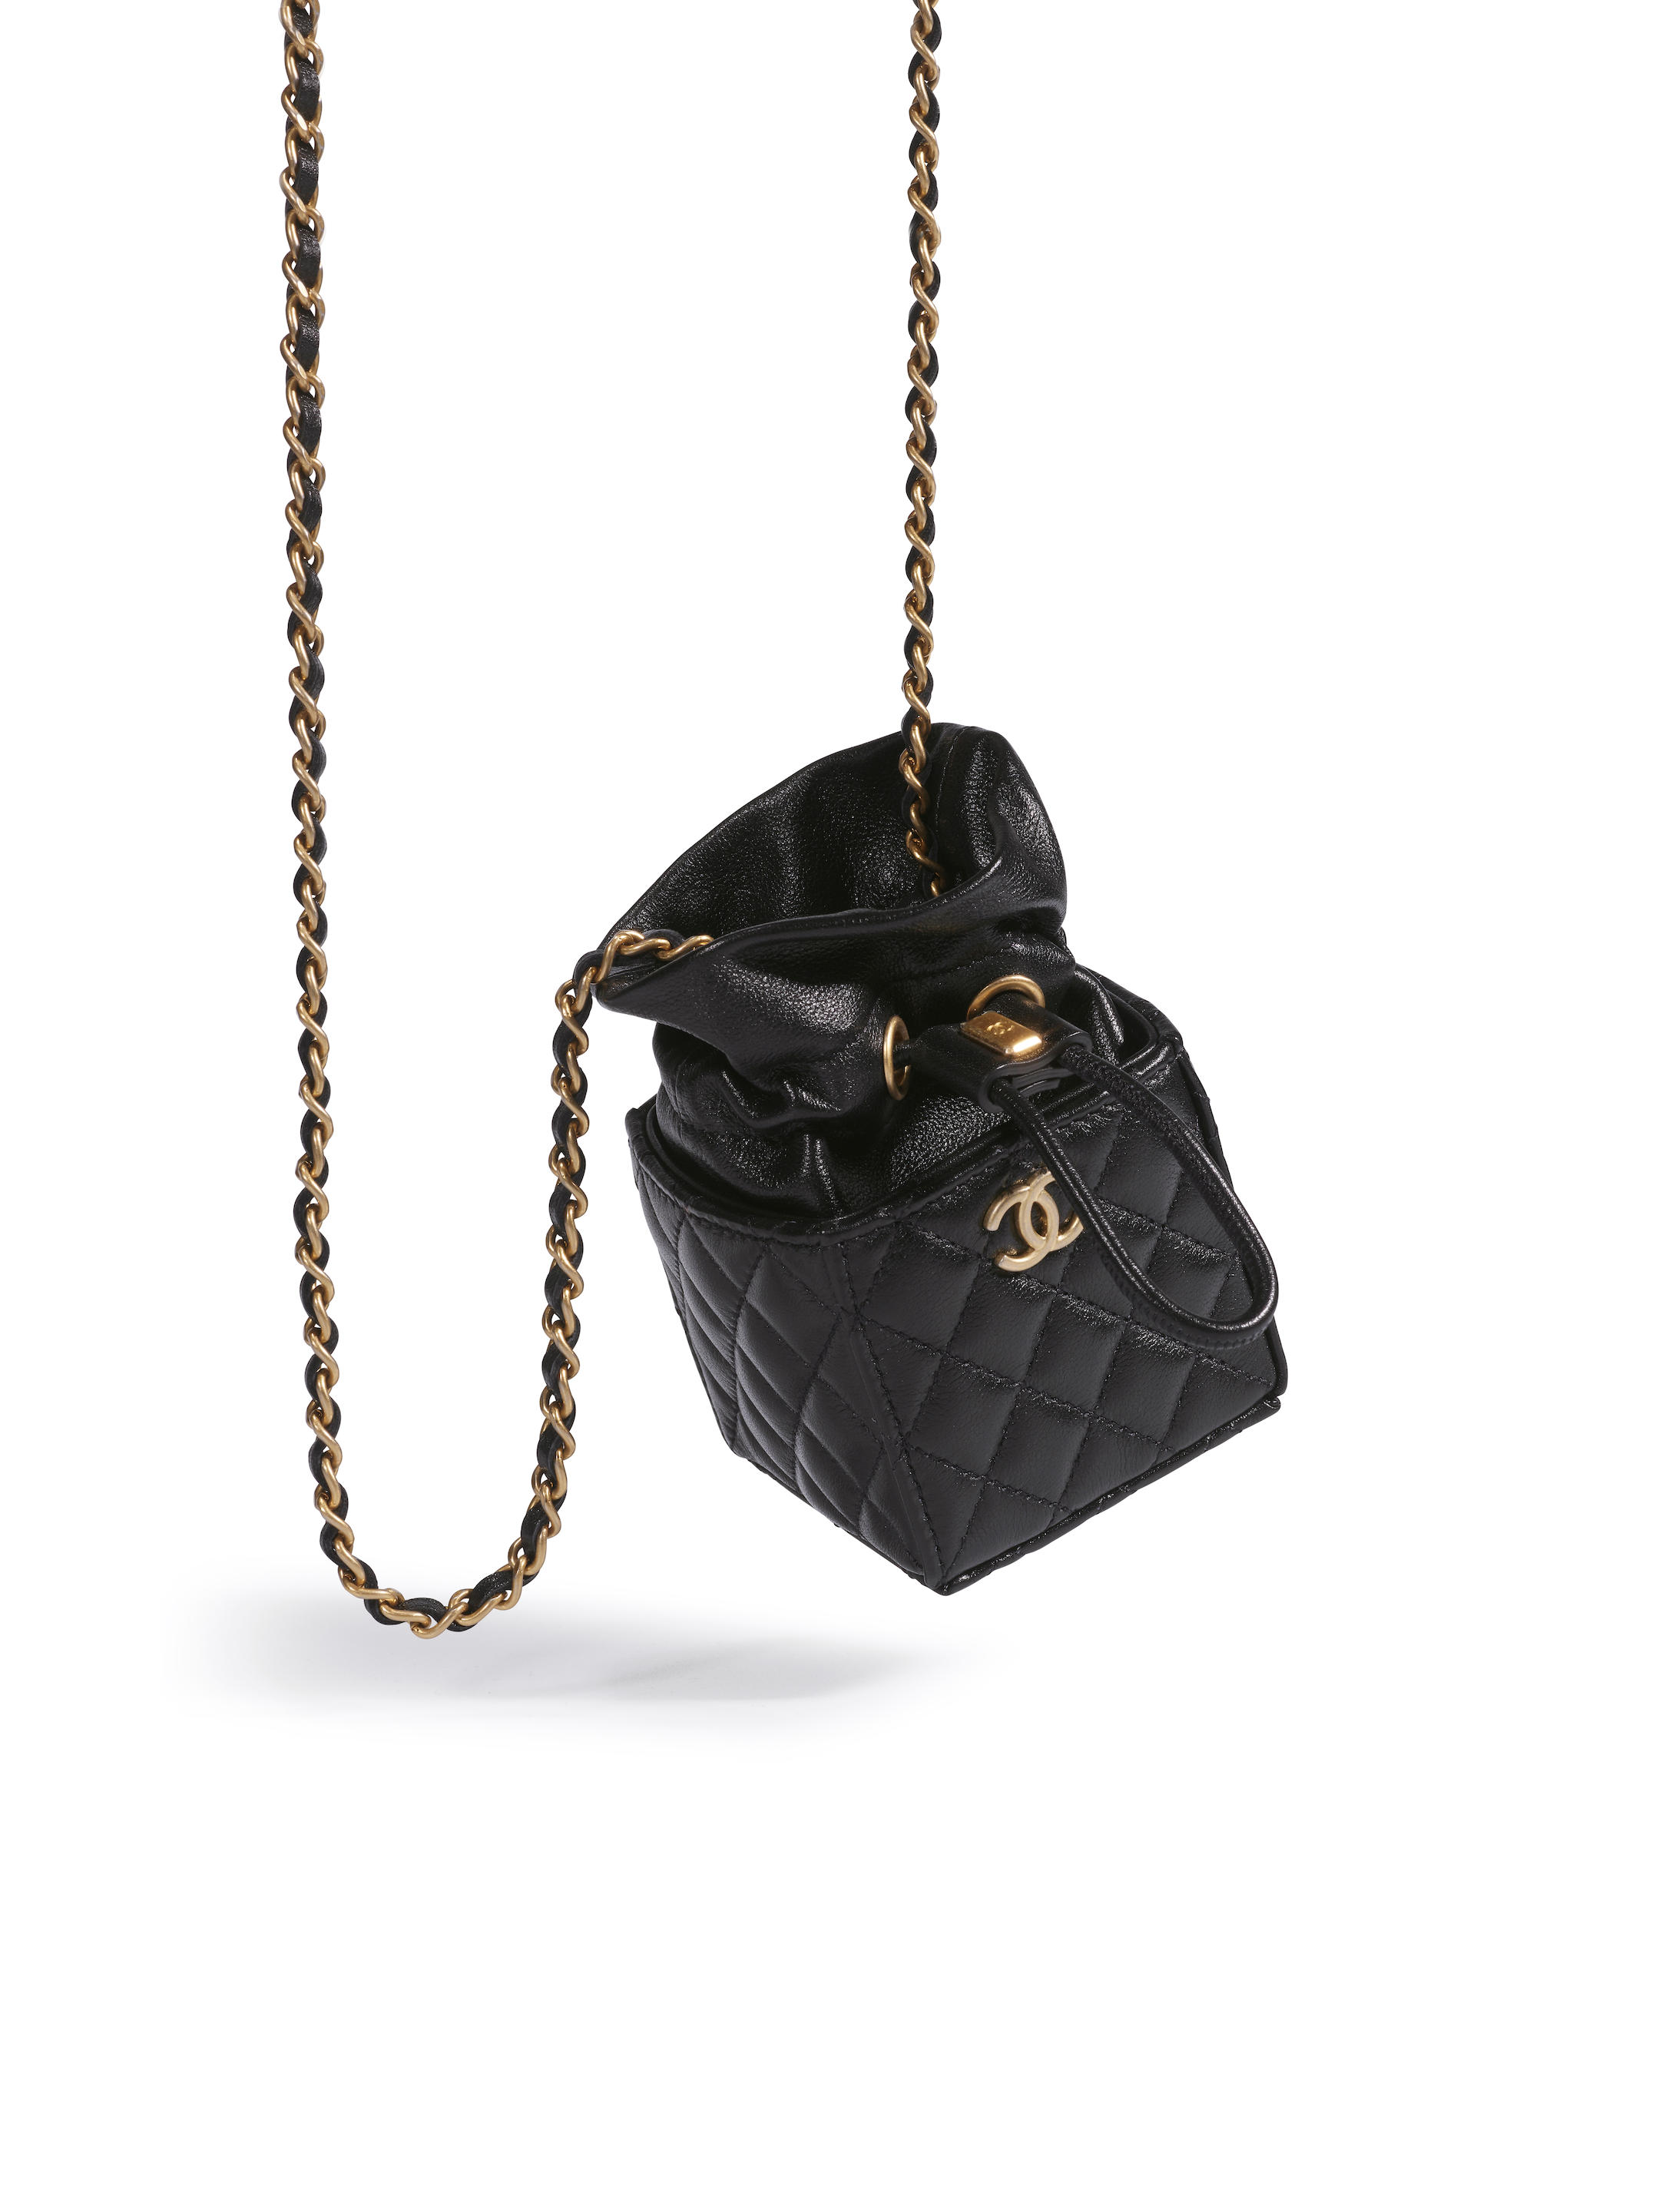 Chanel Black Quilted Lambskin Micro Drawstring Lipstick Case With Chain  Pale Gold Hardware, 2021 And Black Patent Pochette Silver Hardware  Available For Immediate Sale At Sotheby's